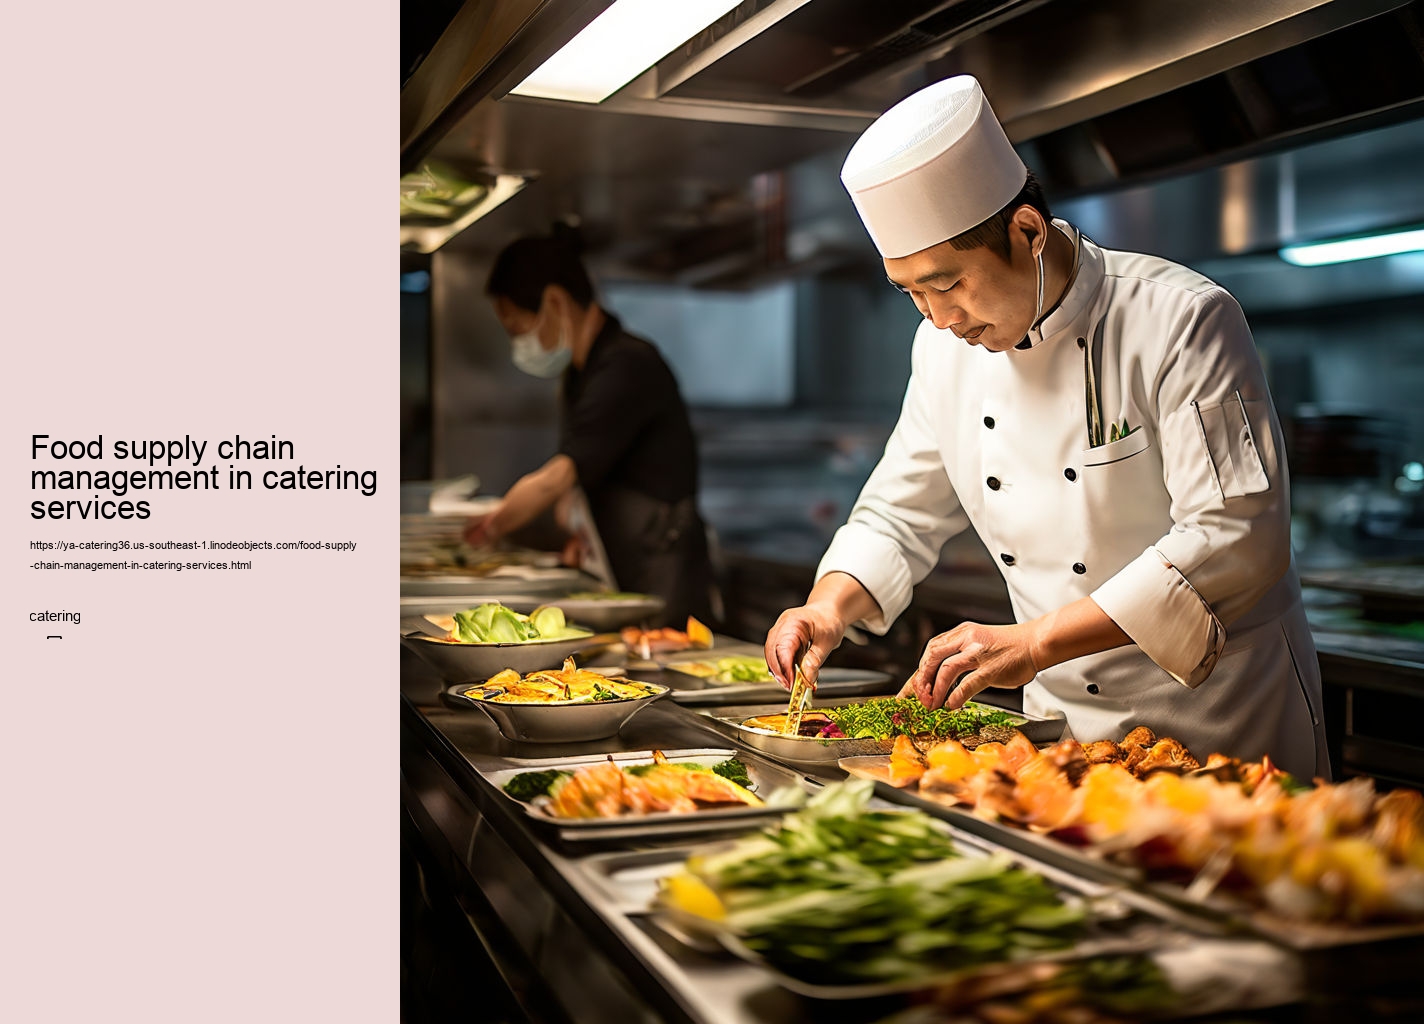 Food supply chain management in catering services